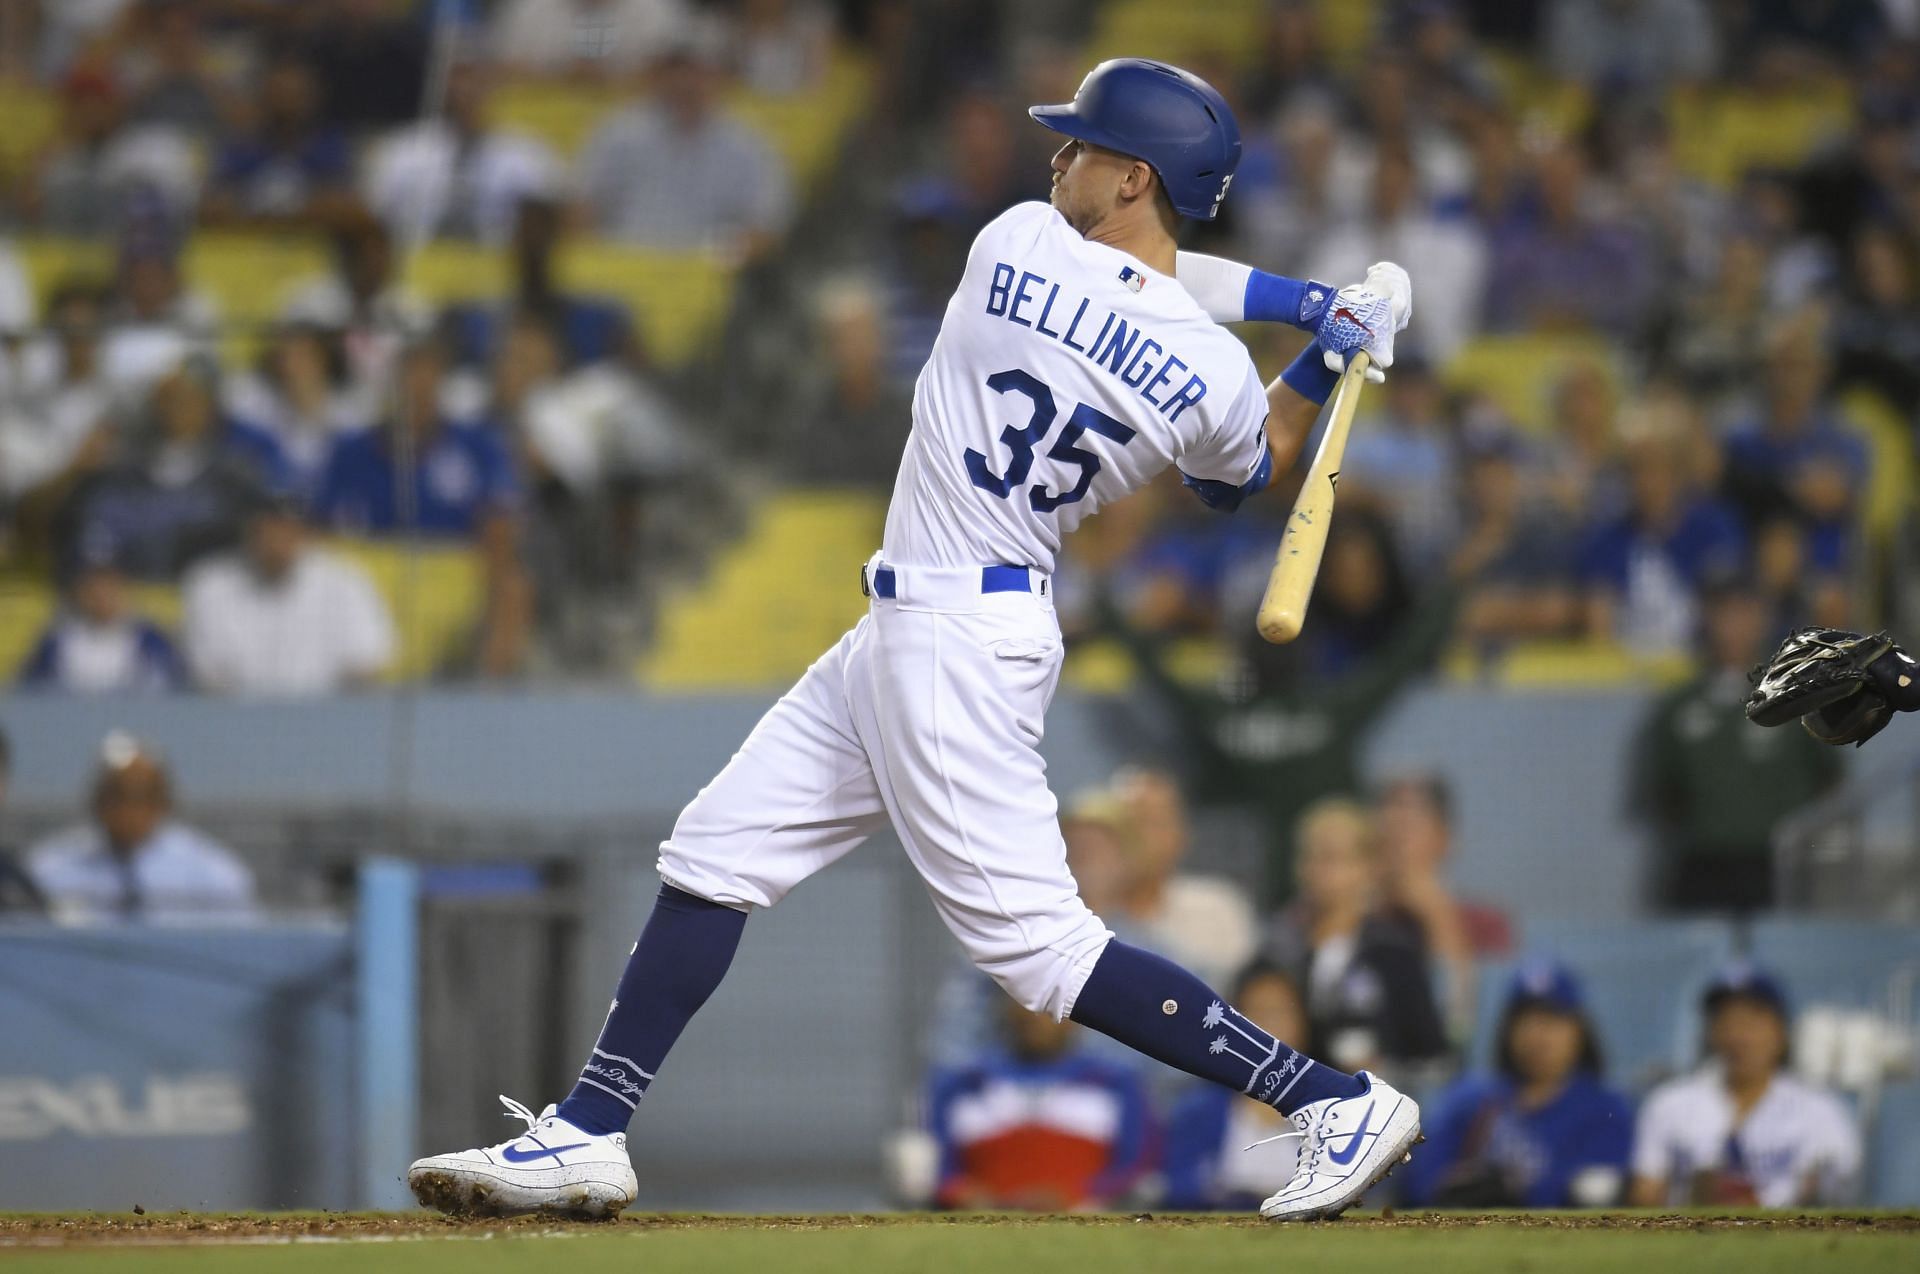 Cody Bellinger needs to find his offense